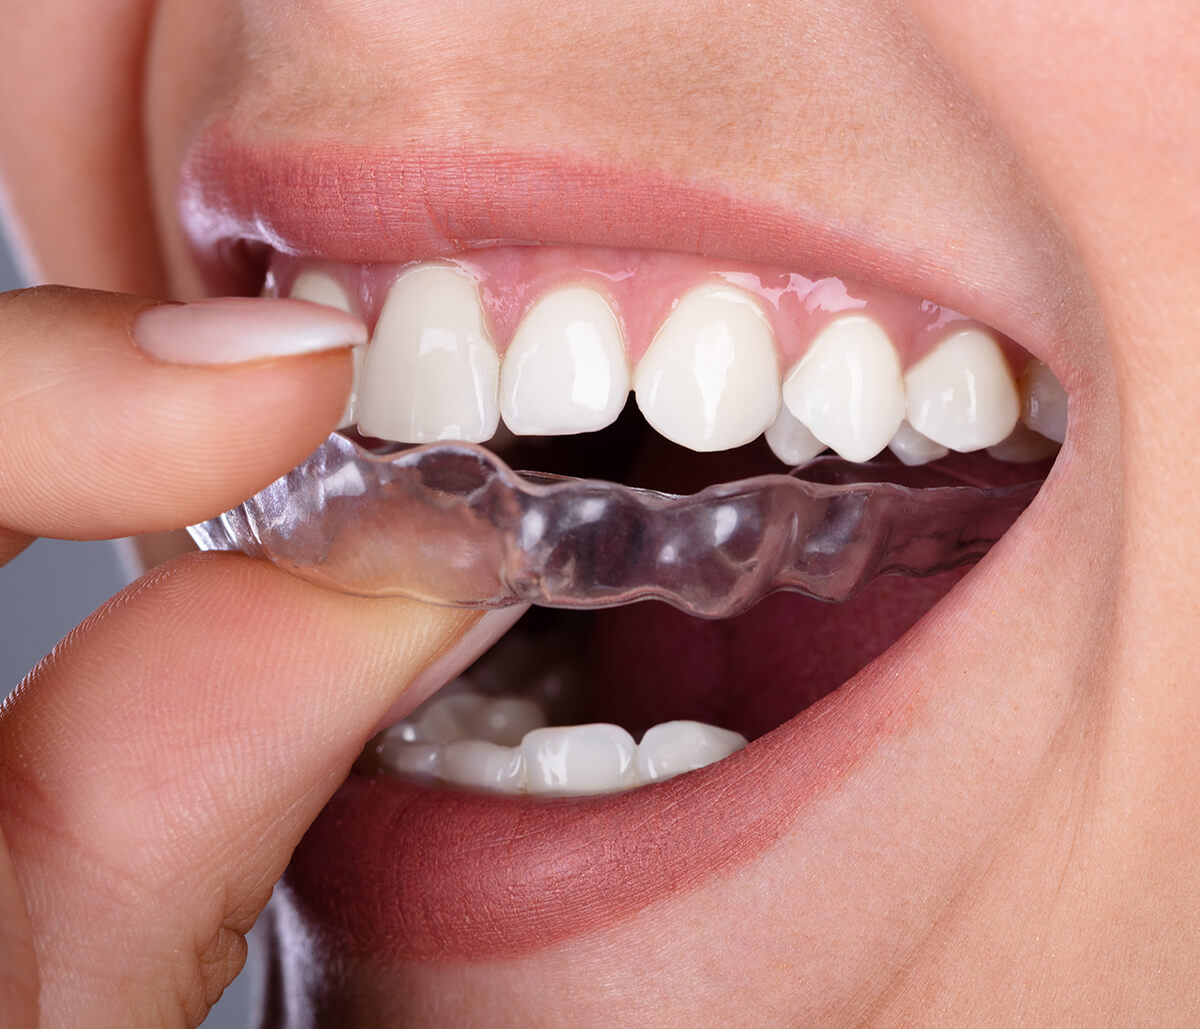 Thornhill Invisalign (Clear Braces) - Dentistry For You